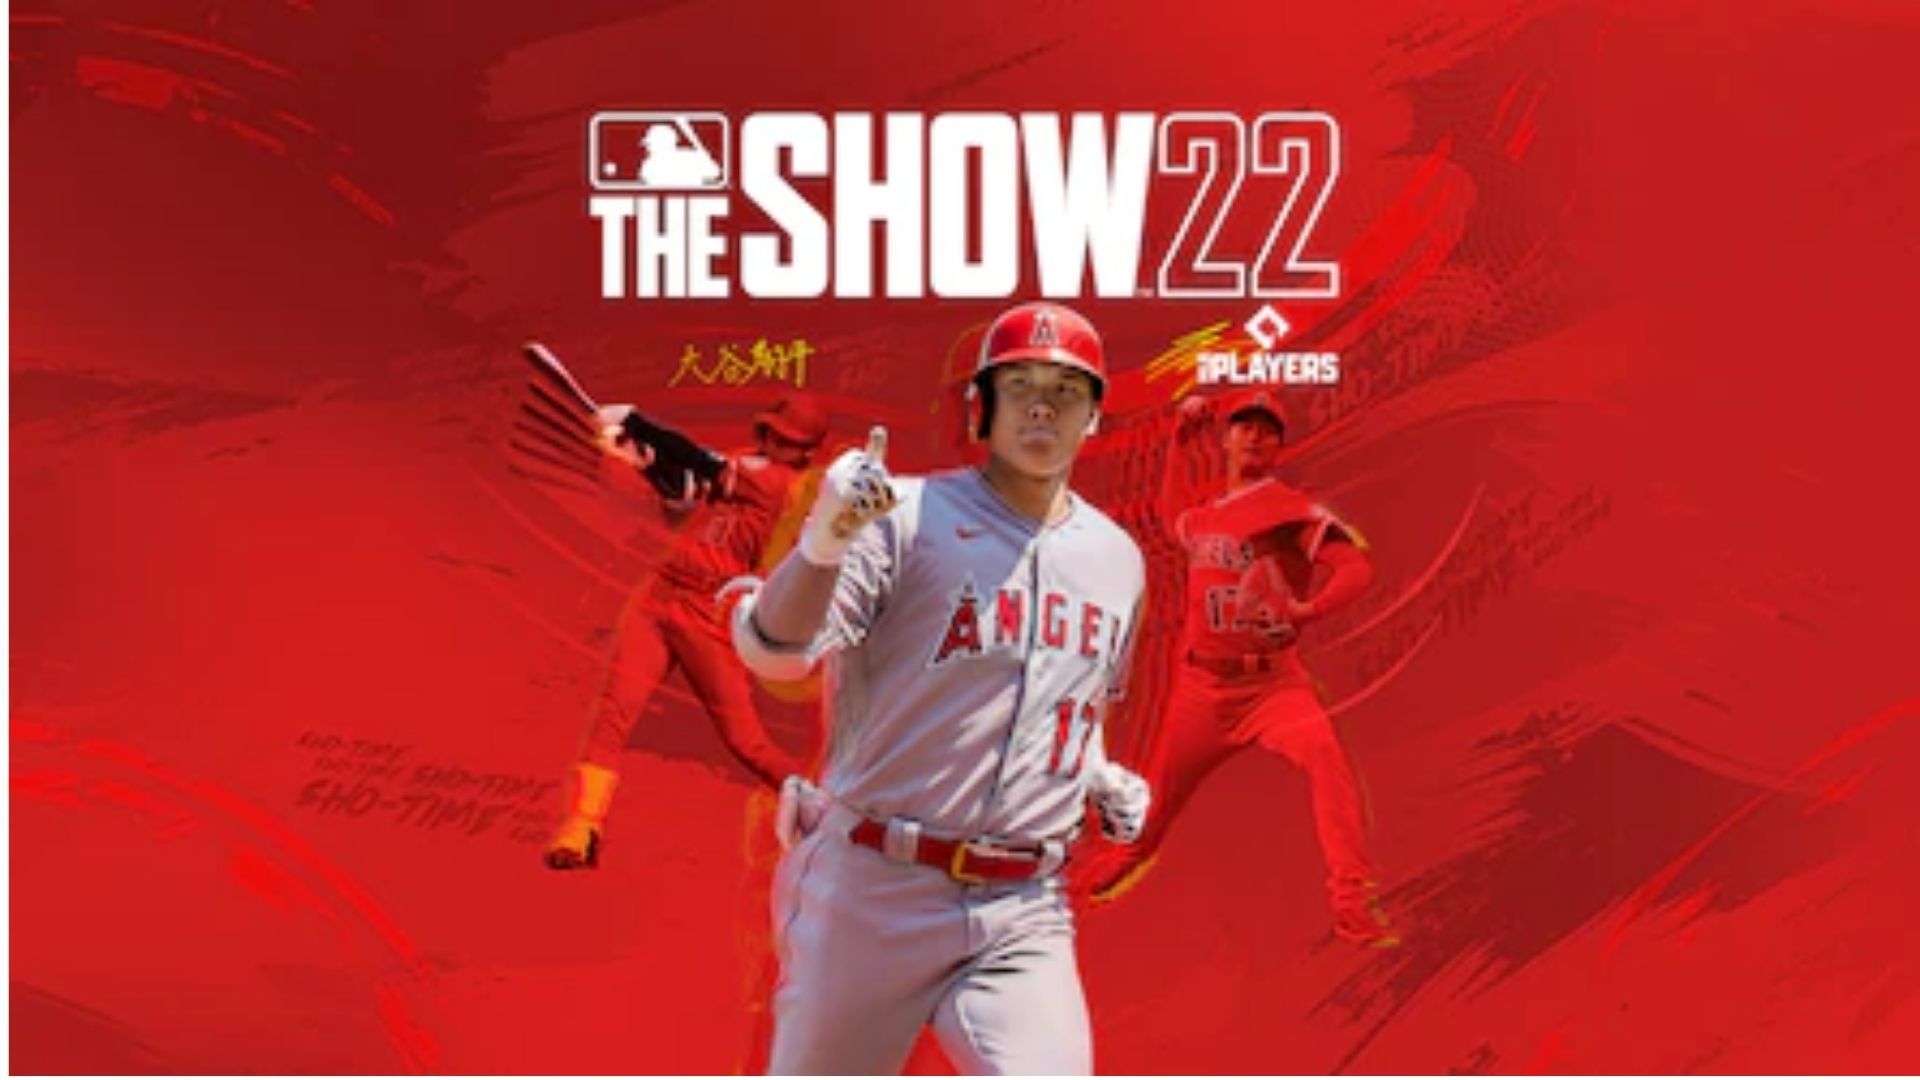 Video games coming on April: MLB The Show